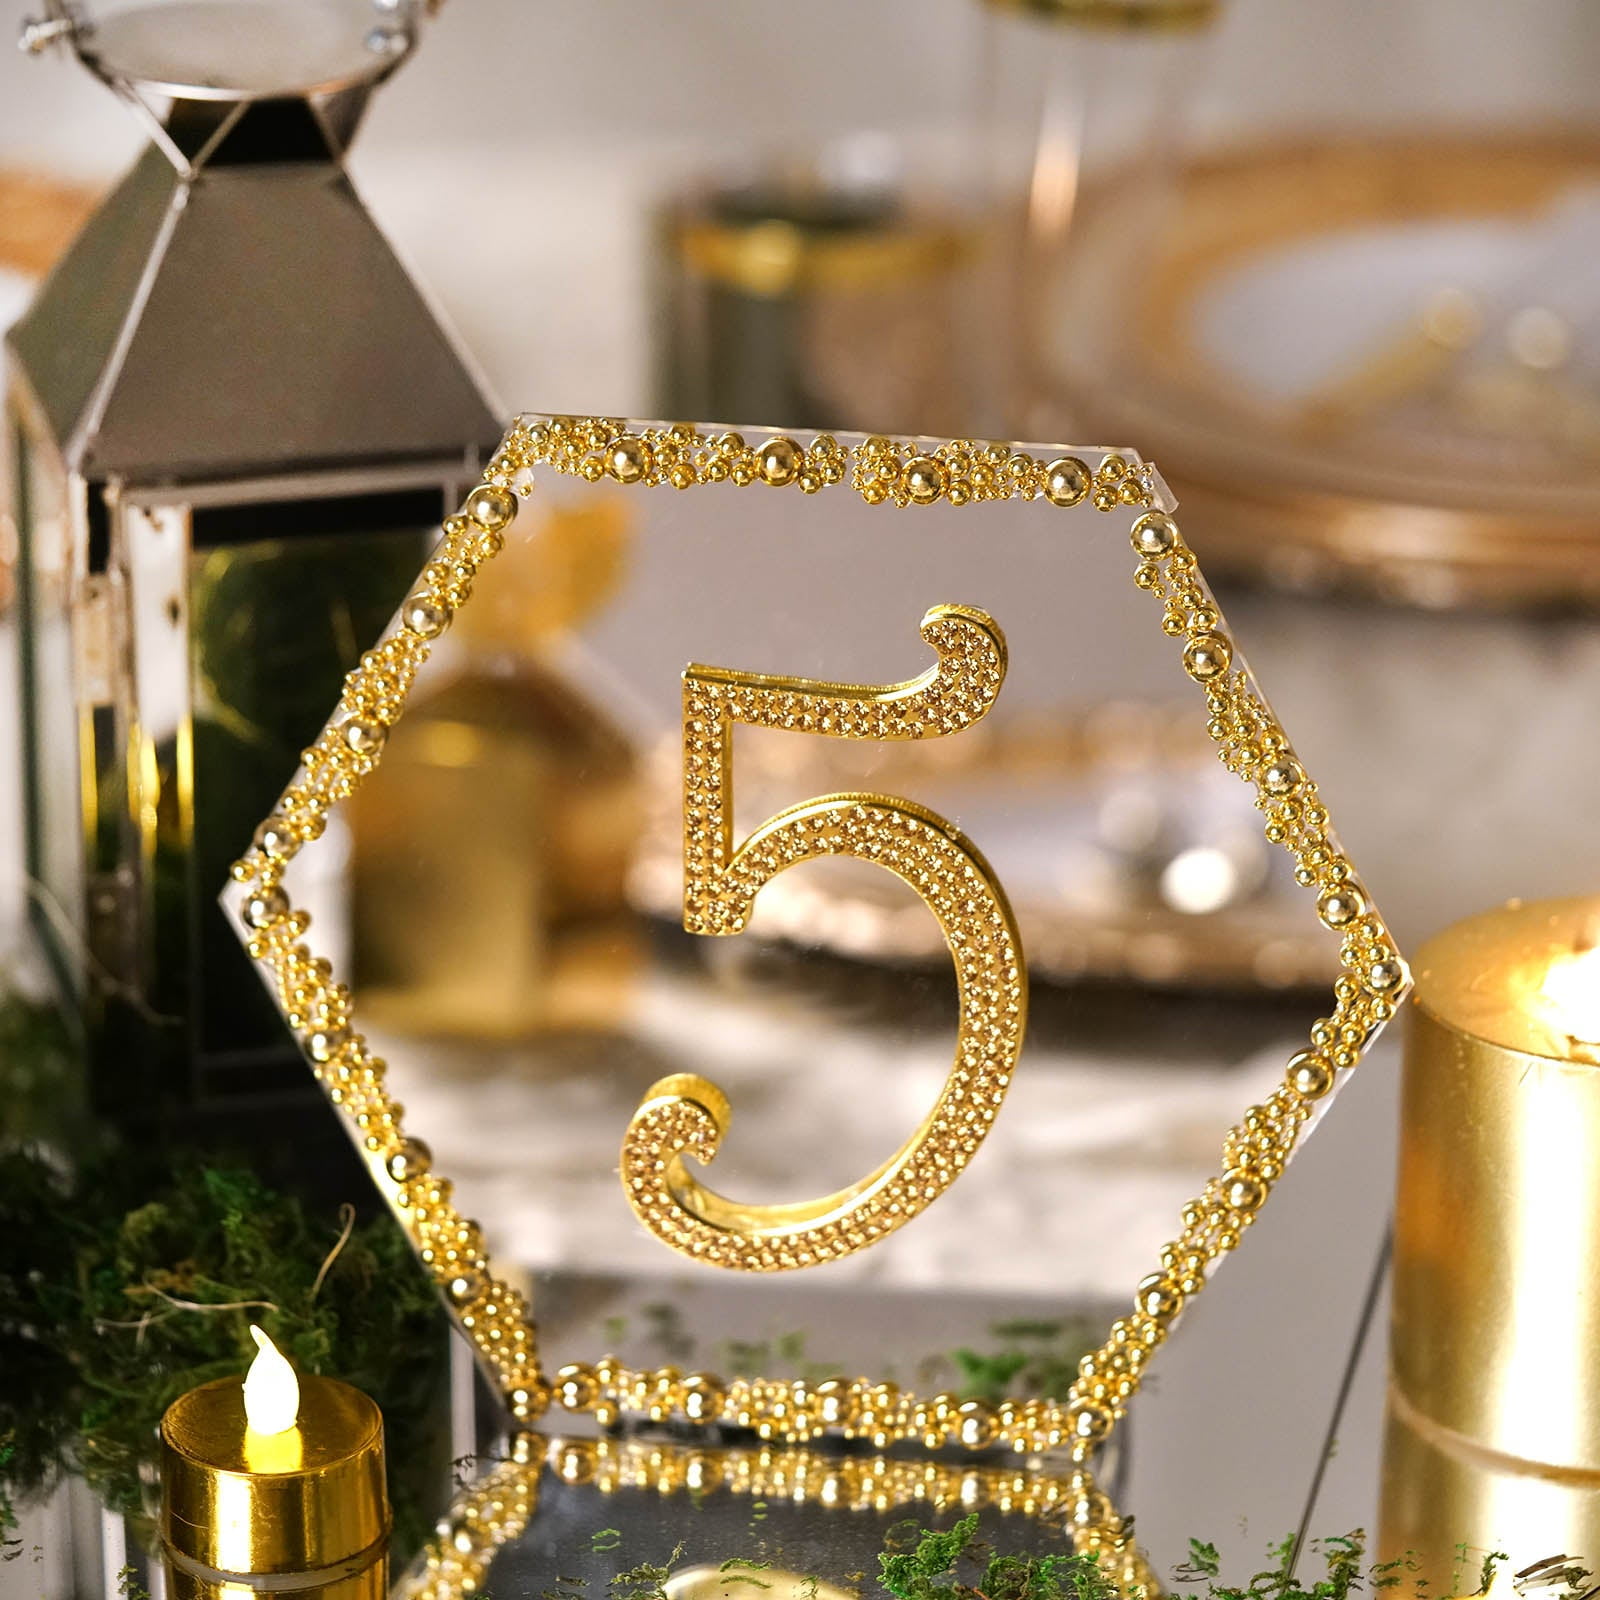 Efavormart 8 Square Glass Mirror Wedding Party Table Decorations